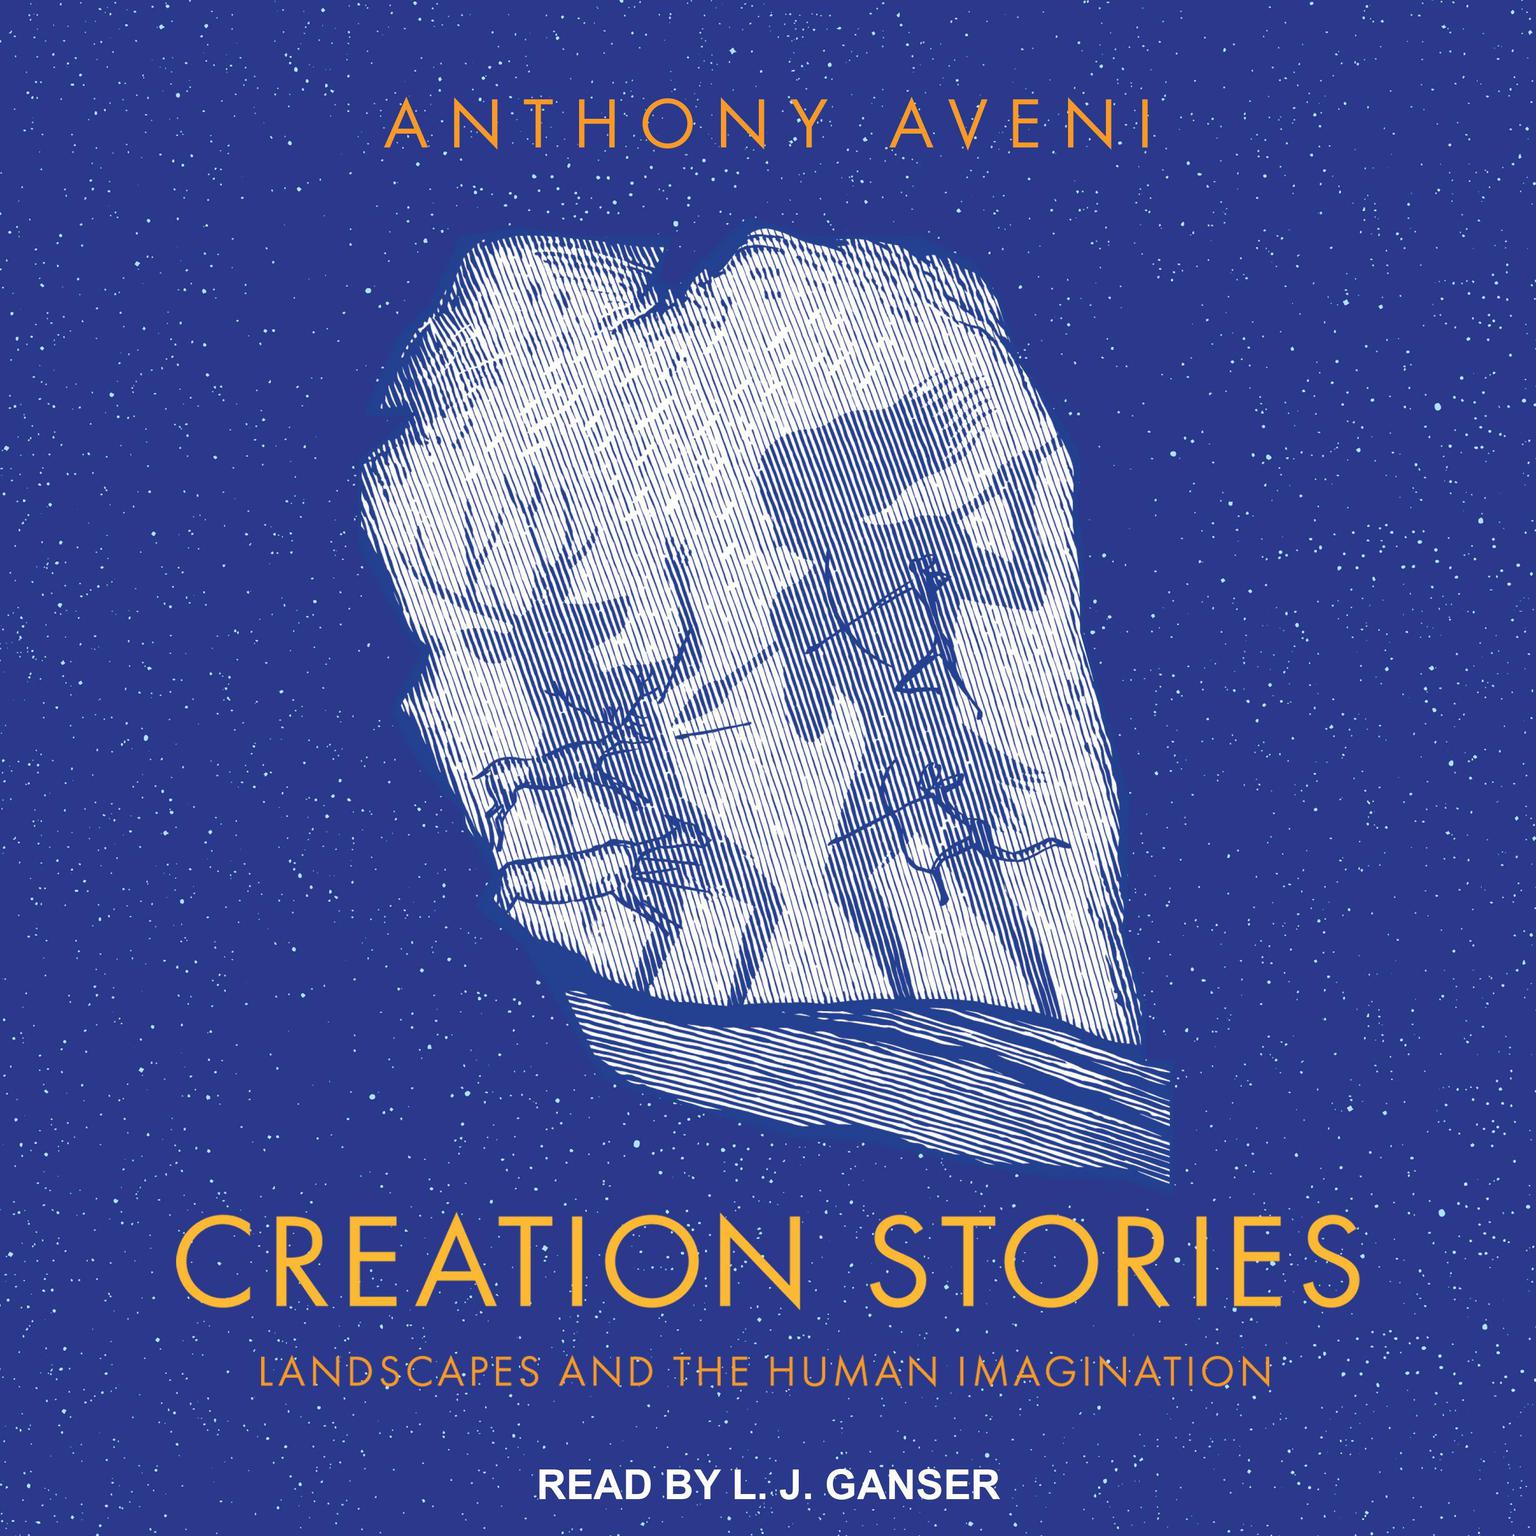 Creation Stories: Landscapes and the Human Imagination Audiobook, by Anthony Aveni